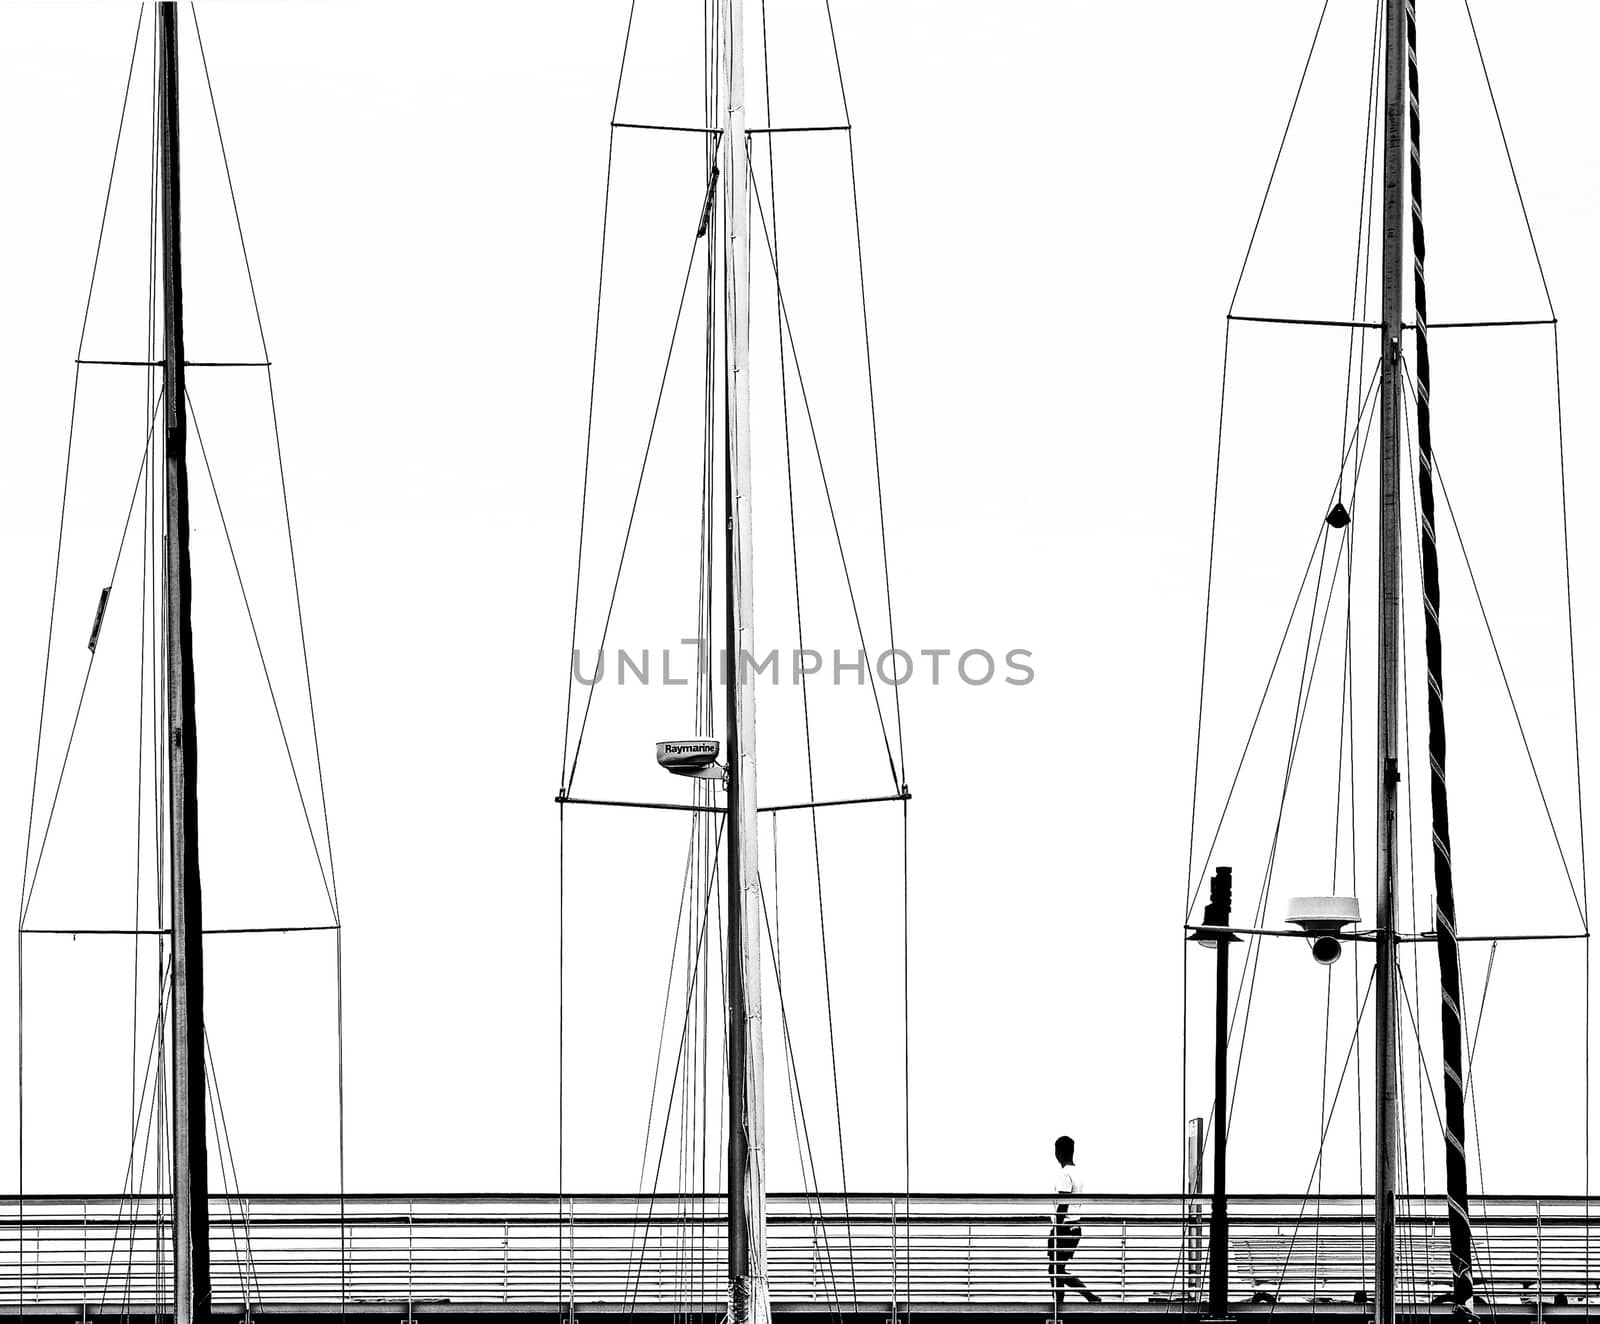 A man over a pier, trapped into sailboats